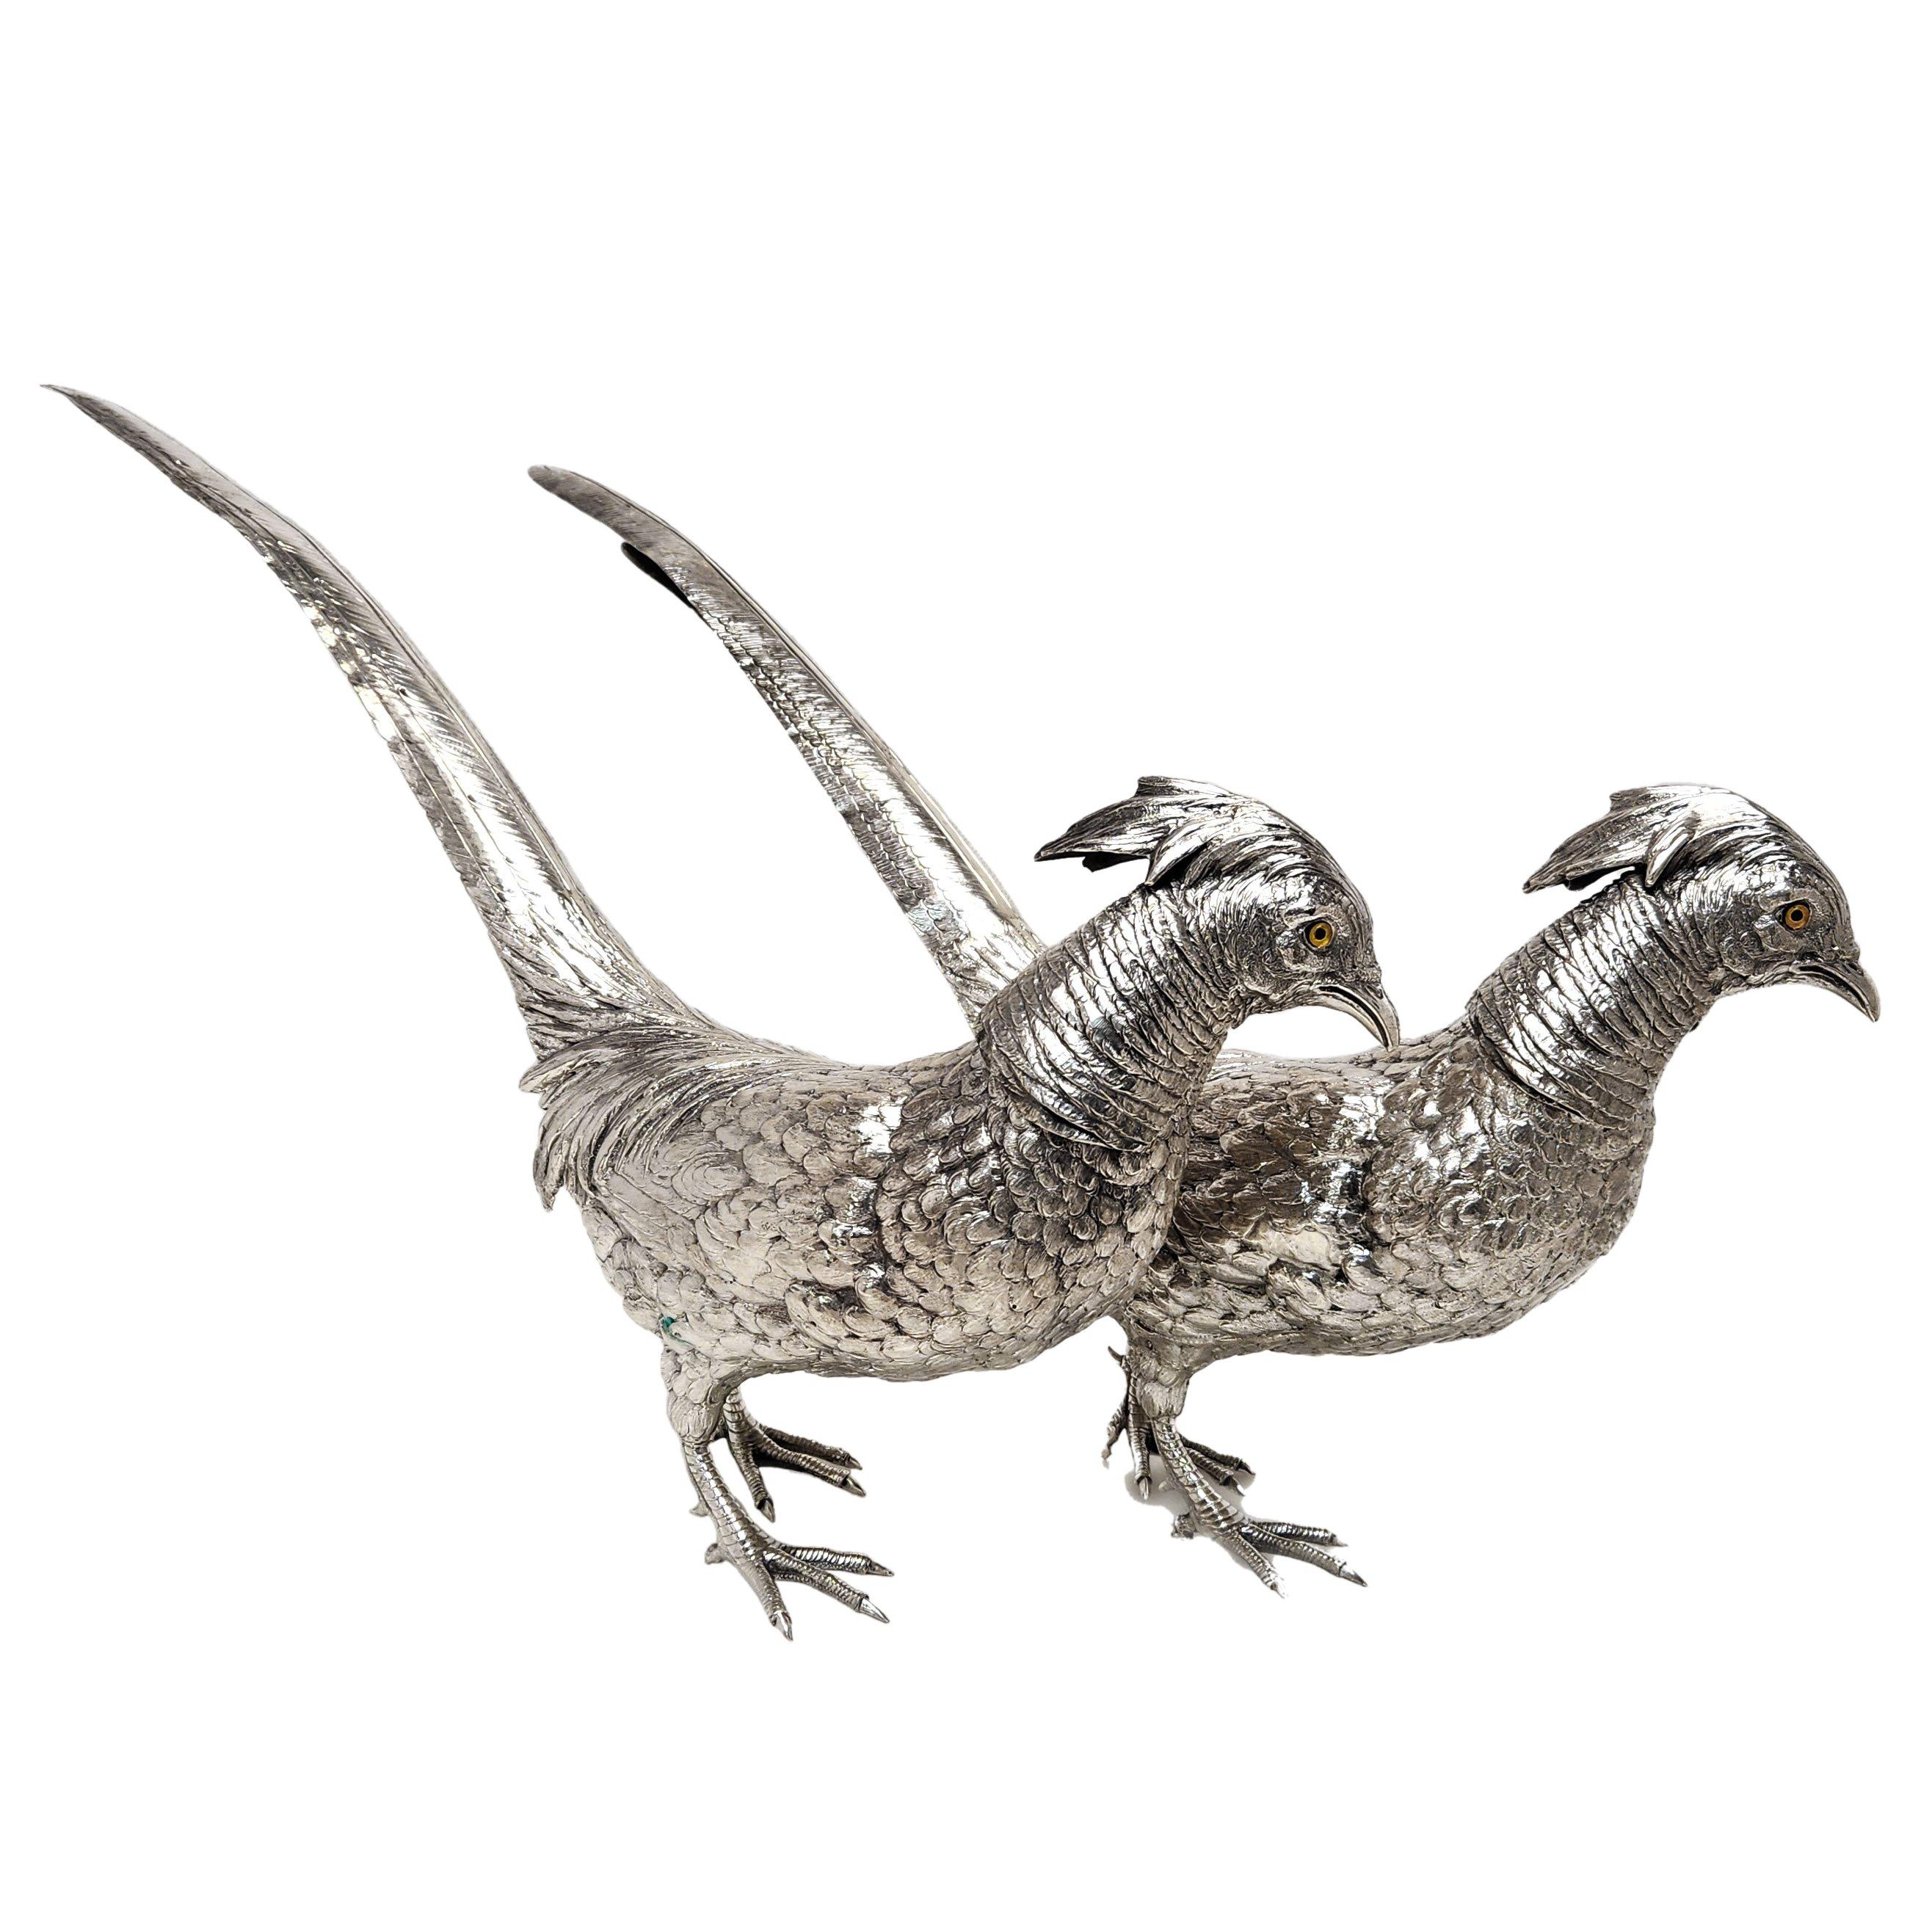 A large and impressive pair of Antique Silver Pheasants. These Model Pheasants have a lovely attention to detail and feature inset glass eyes. The Birds have removable heads as their historical counterparts would have.

Made in Germany in c.